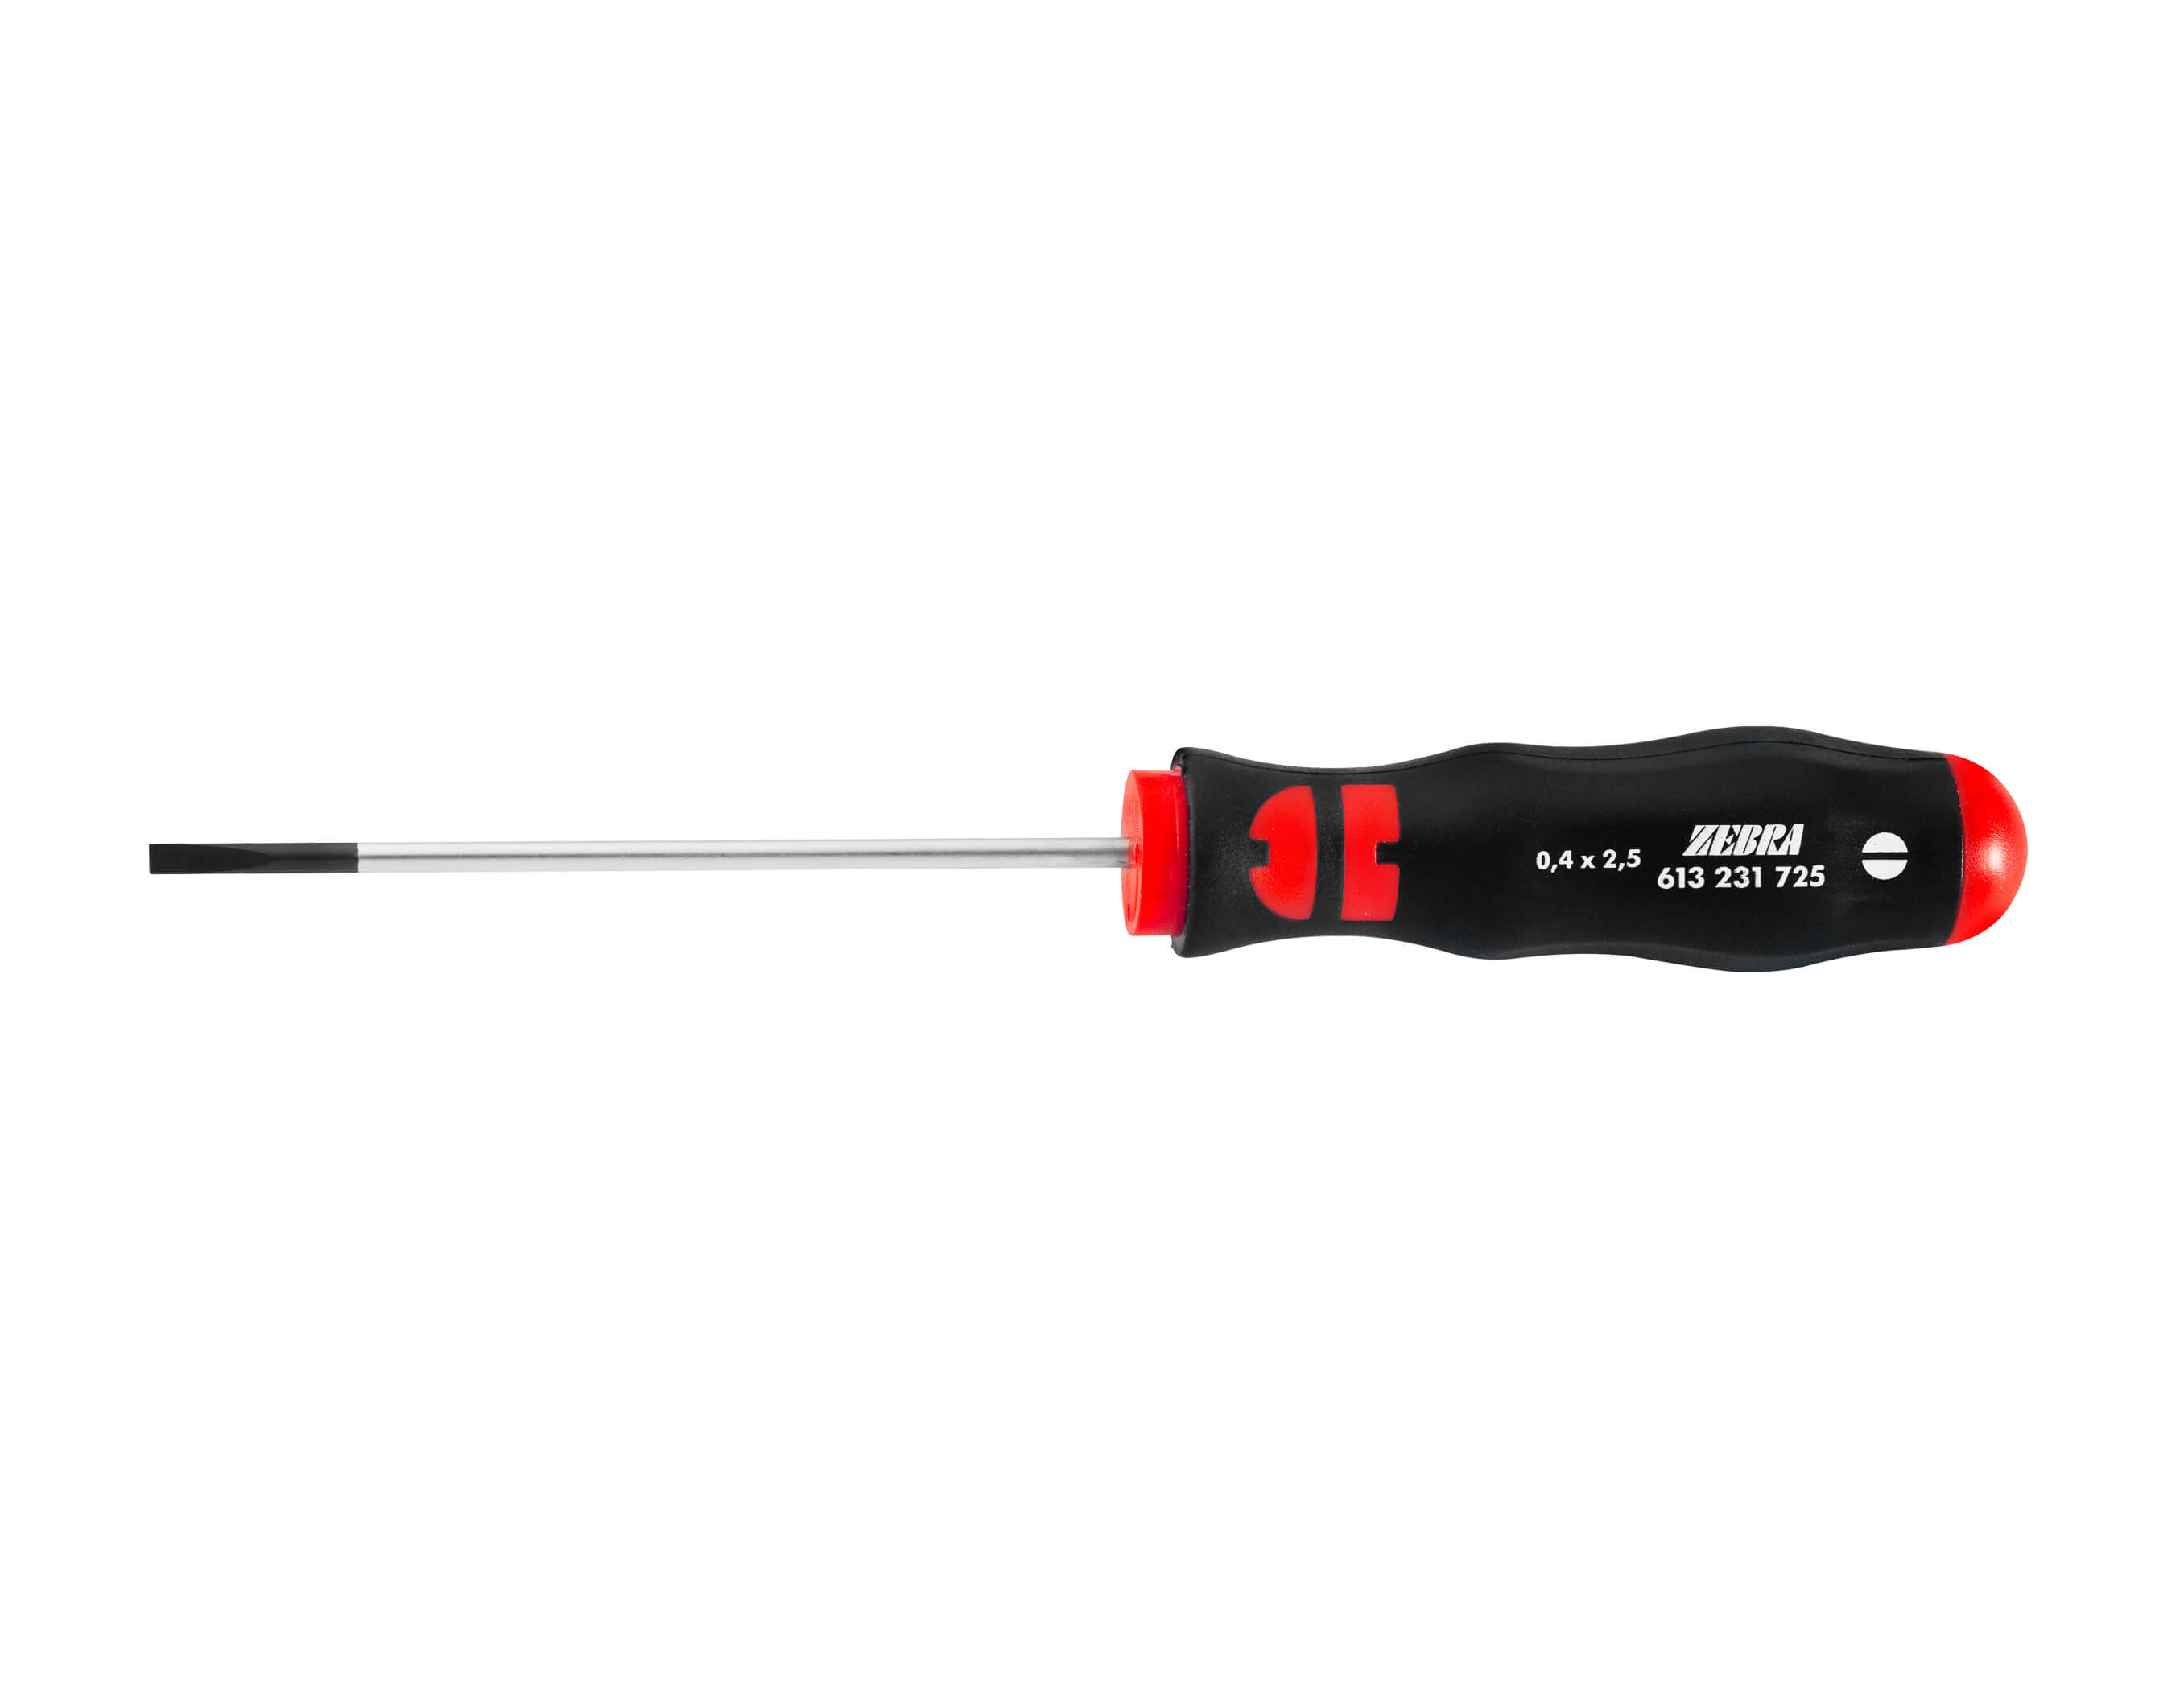 Slotted screwdriver round blade narrow 0.6X3.5X100